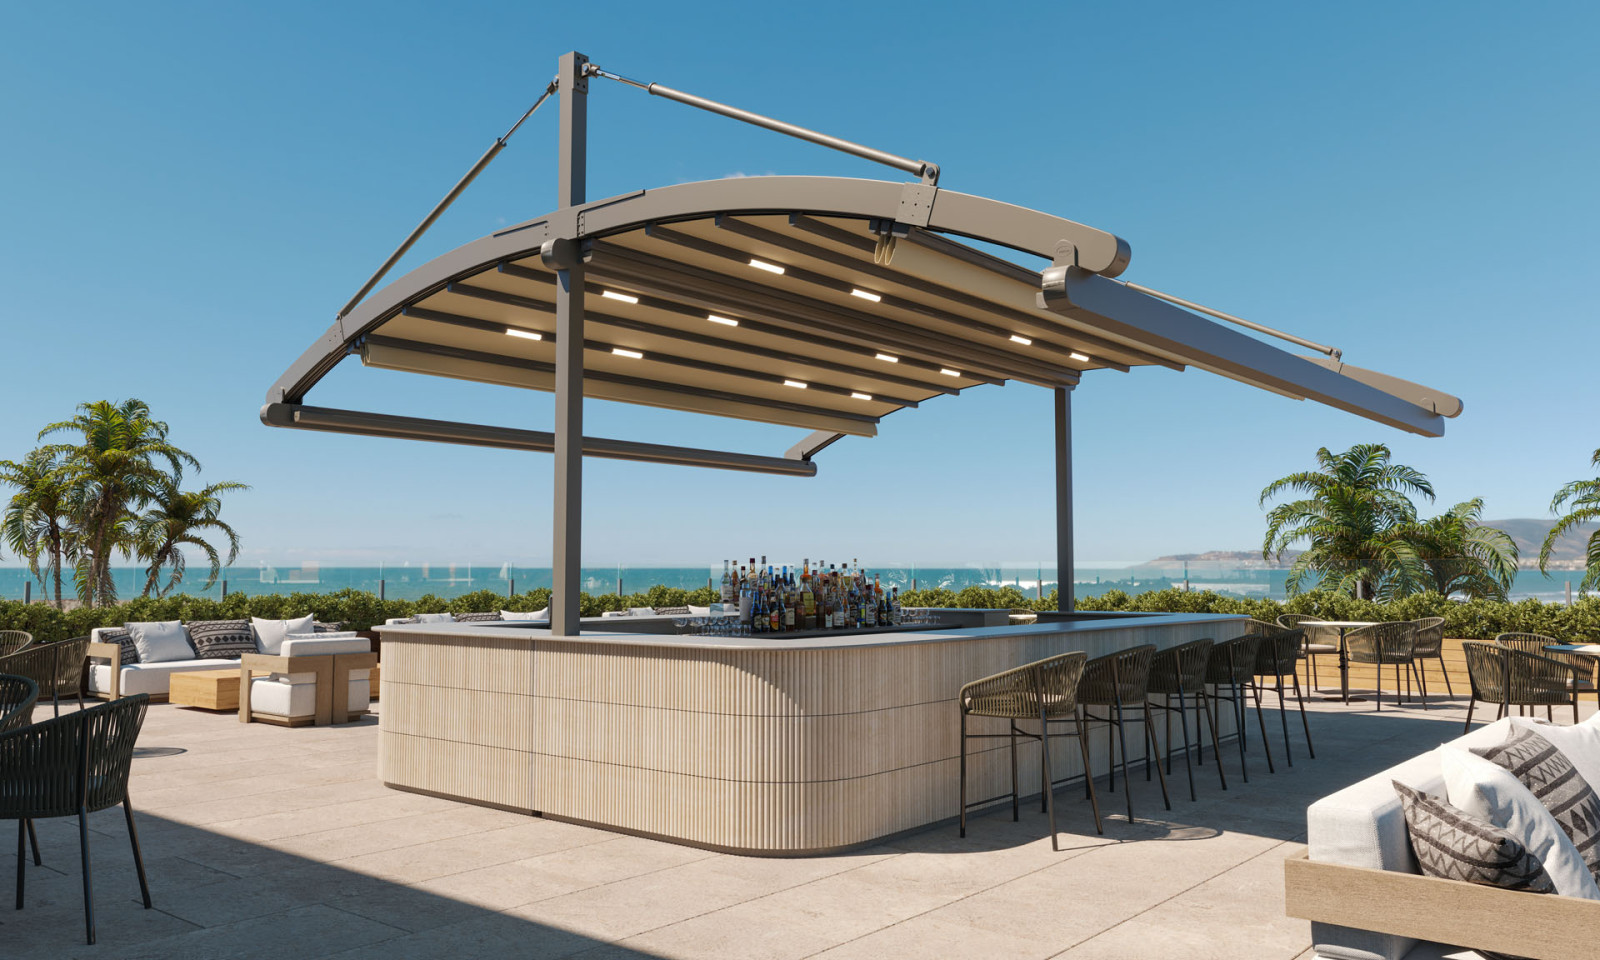 A bar outdoors covered by Fabric Pergola with rounded roof, providing a shaded spot for enjoying beverages.